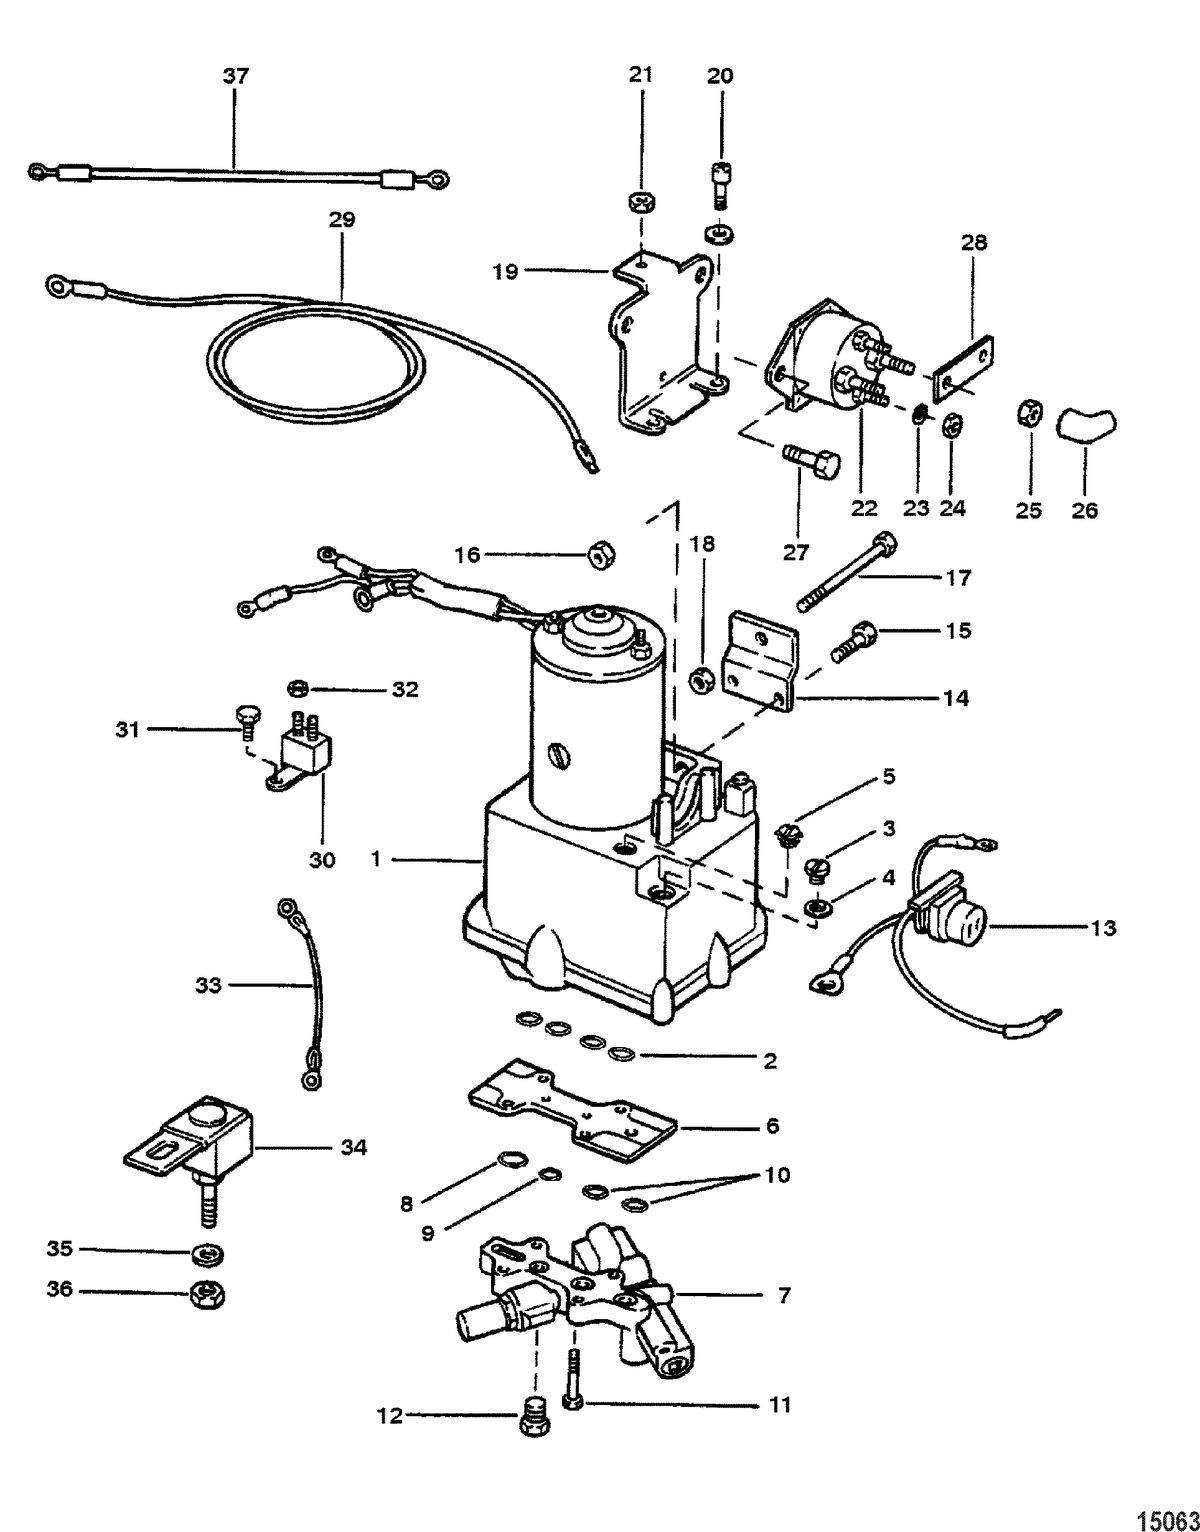 ACCESSORIES TRIM / TILT / LIFT SYSTEMS AND COMPONENTS Power Trim Kit(76509A25 And 76509A26) (Page 1 Of 2)